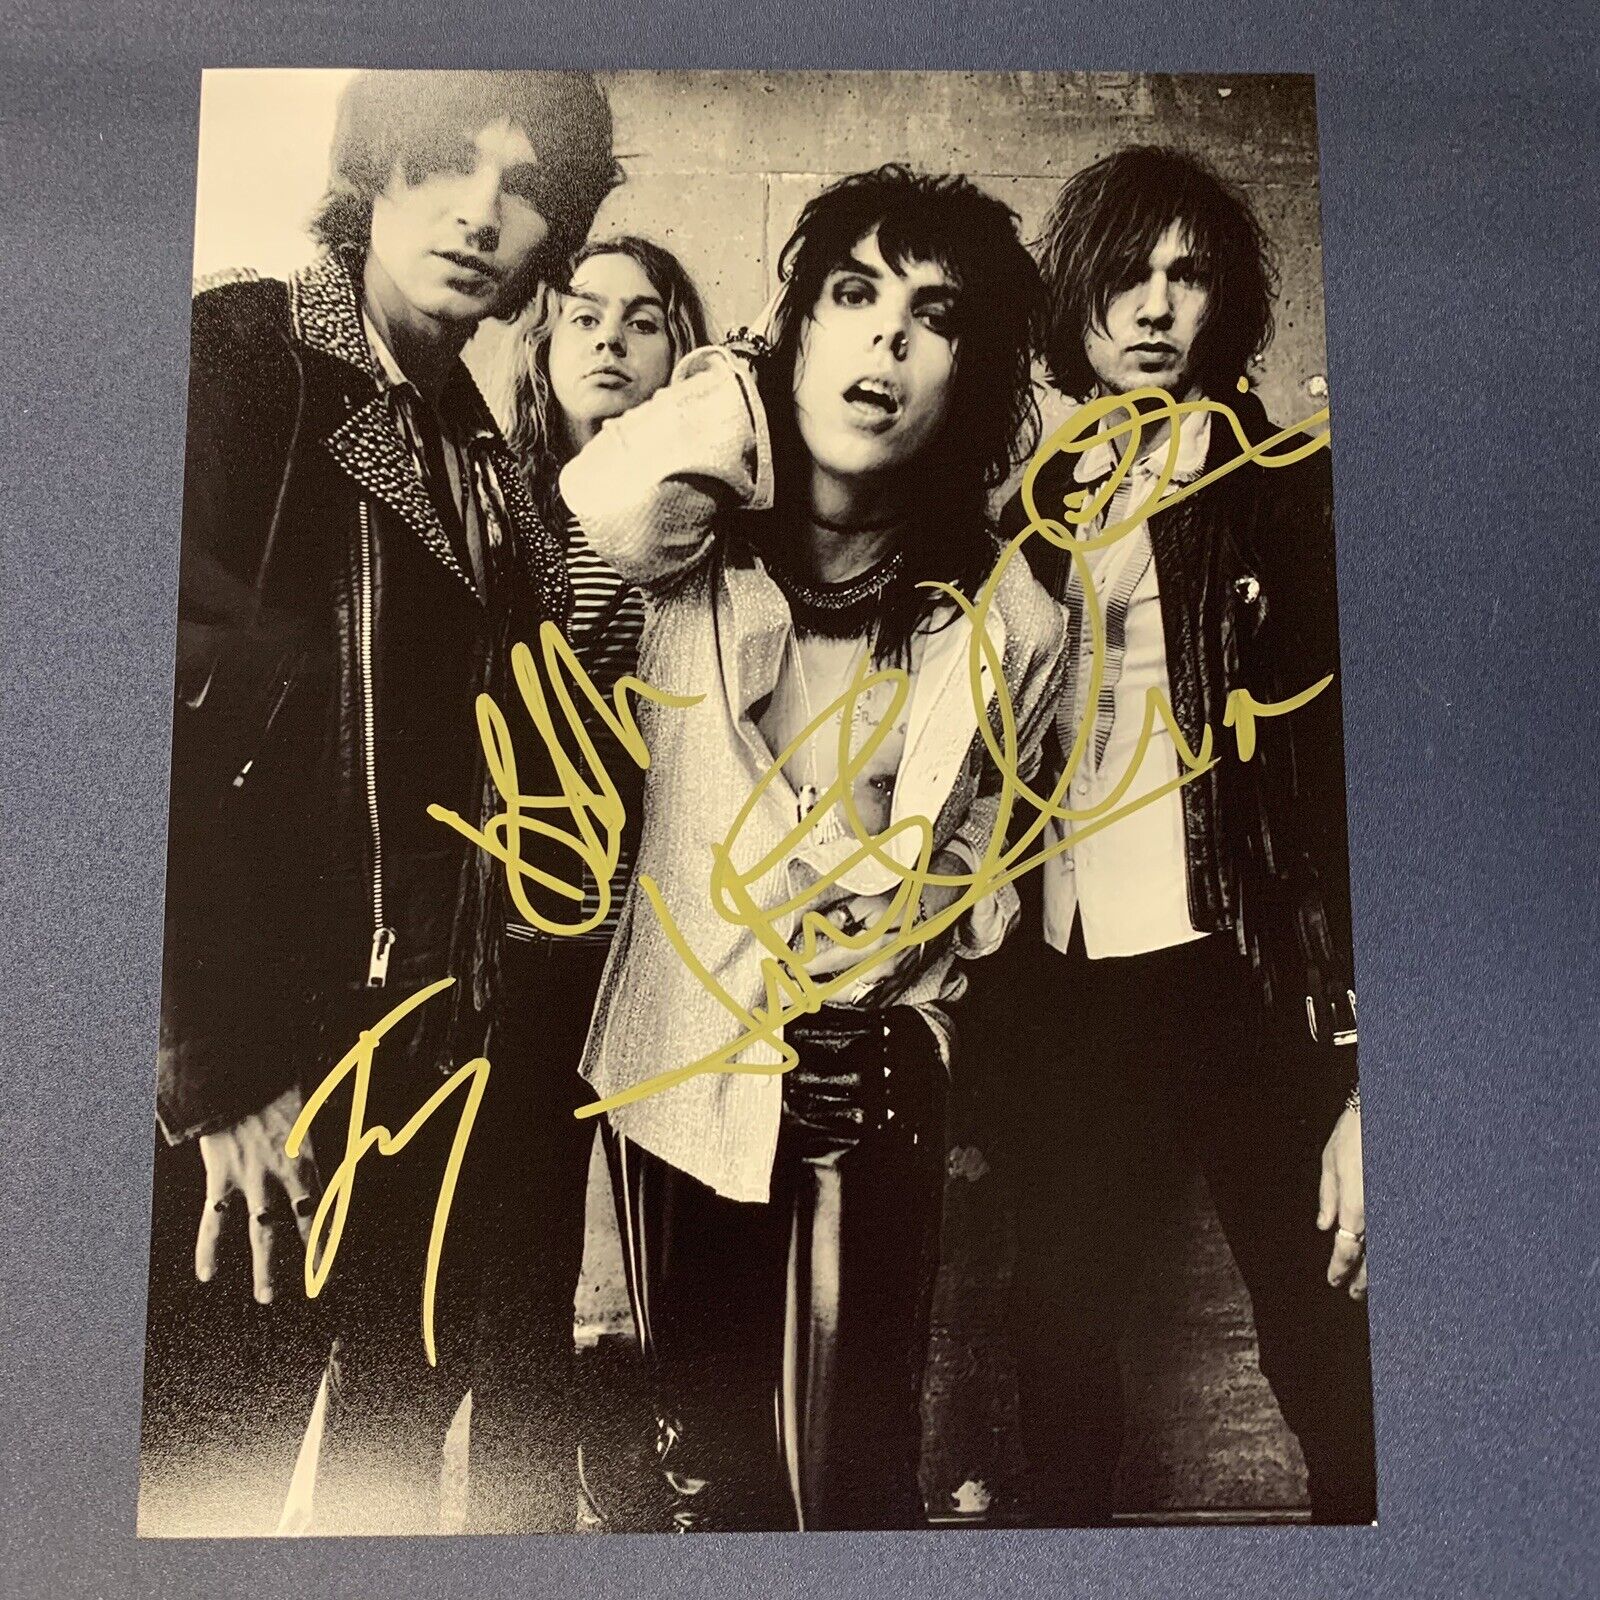 THE STRUTS FULL BAND SIGNED 8x10 Photo Poster painting SIGNED AUTOGRAPHED BRITISH PROOF COA